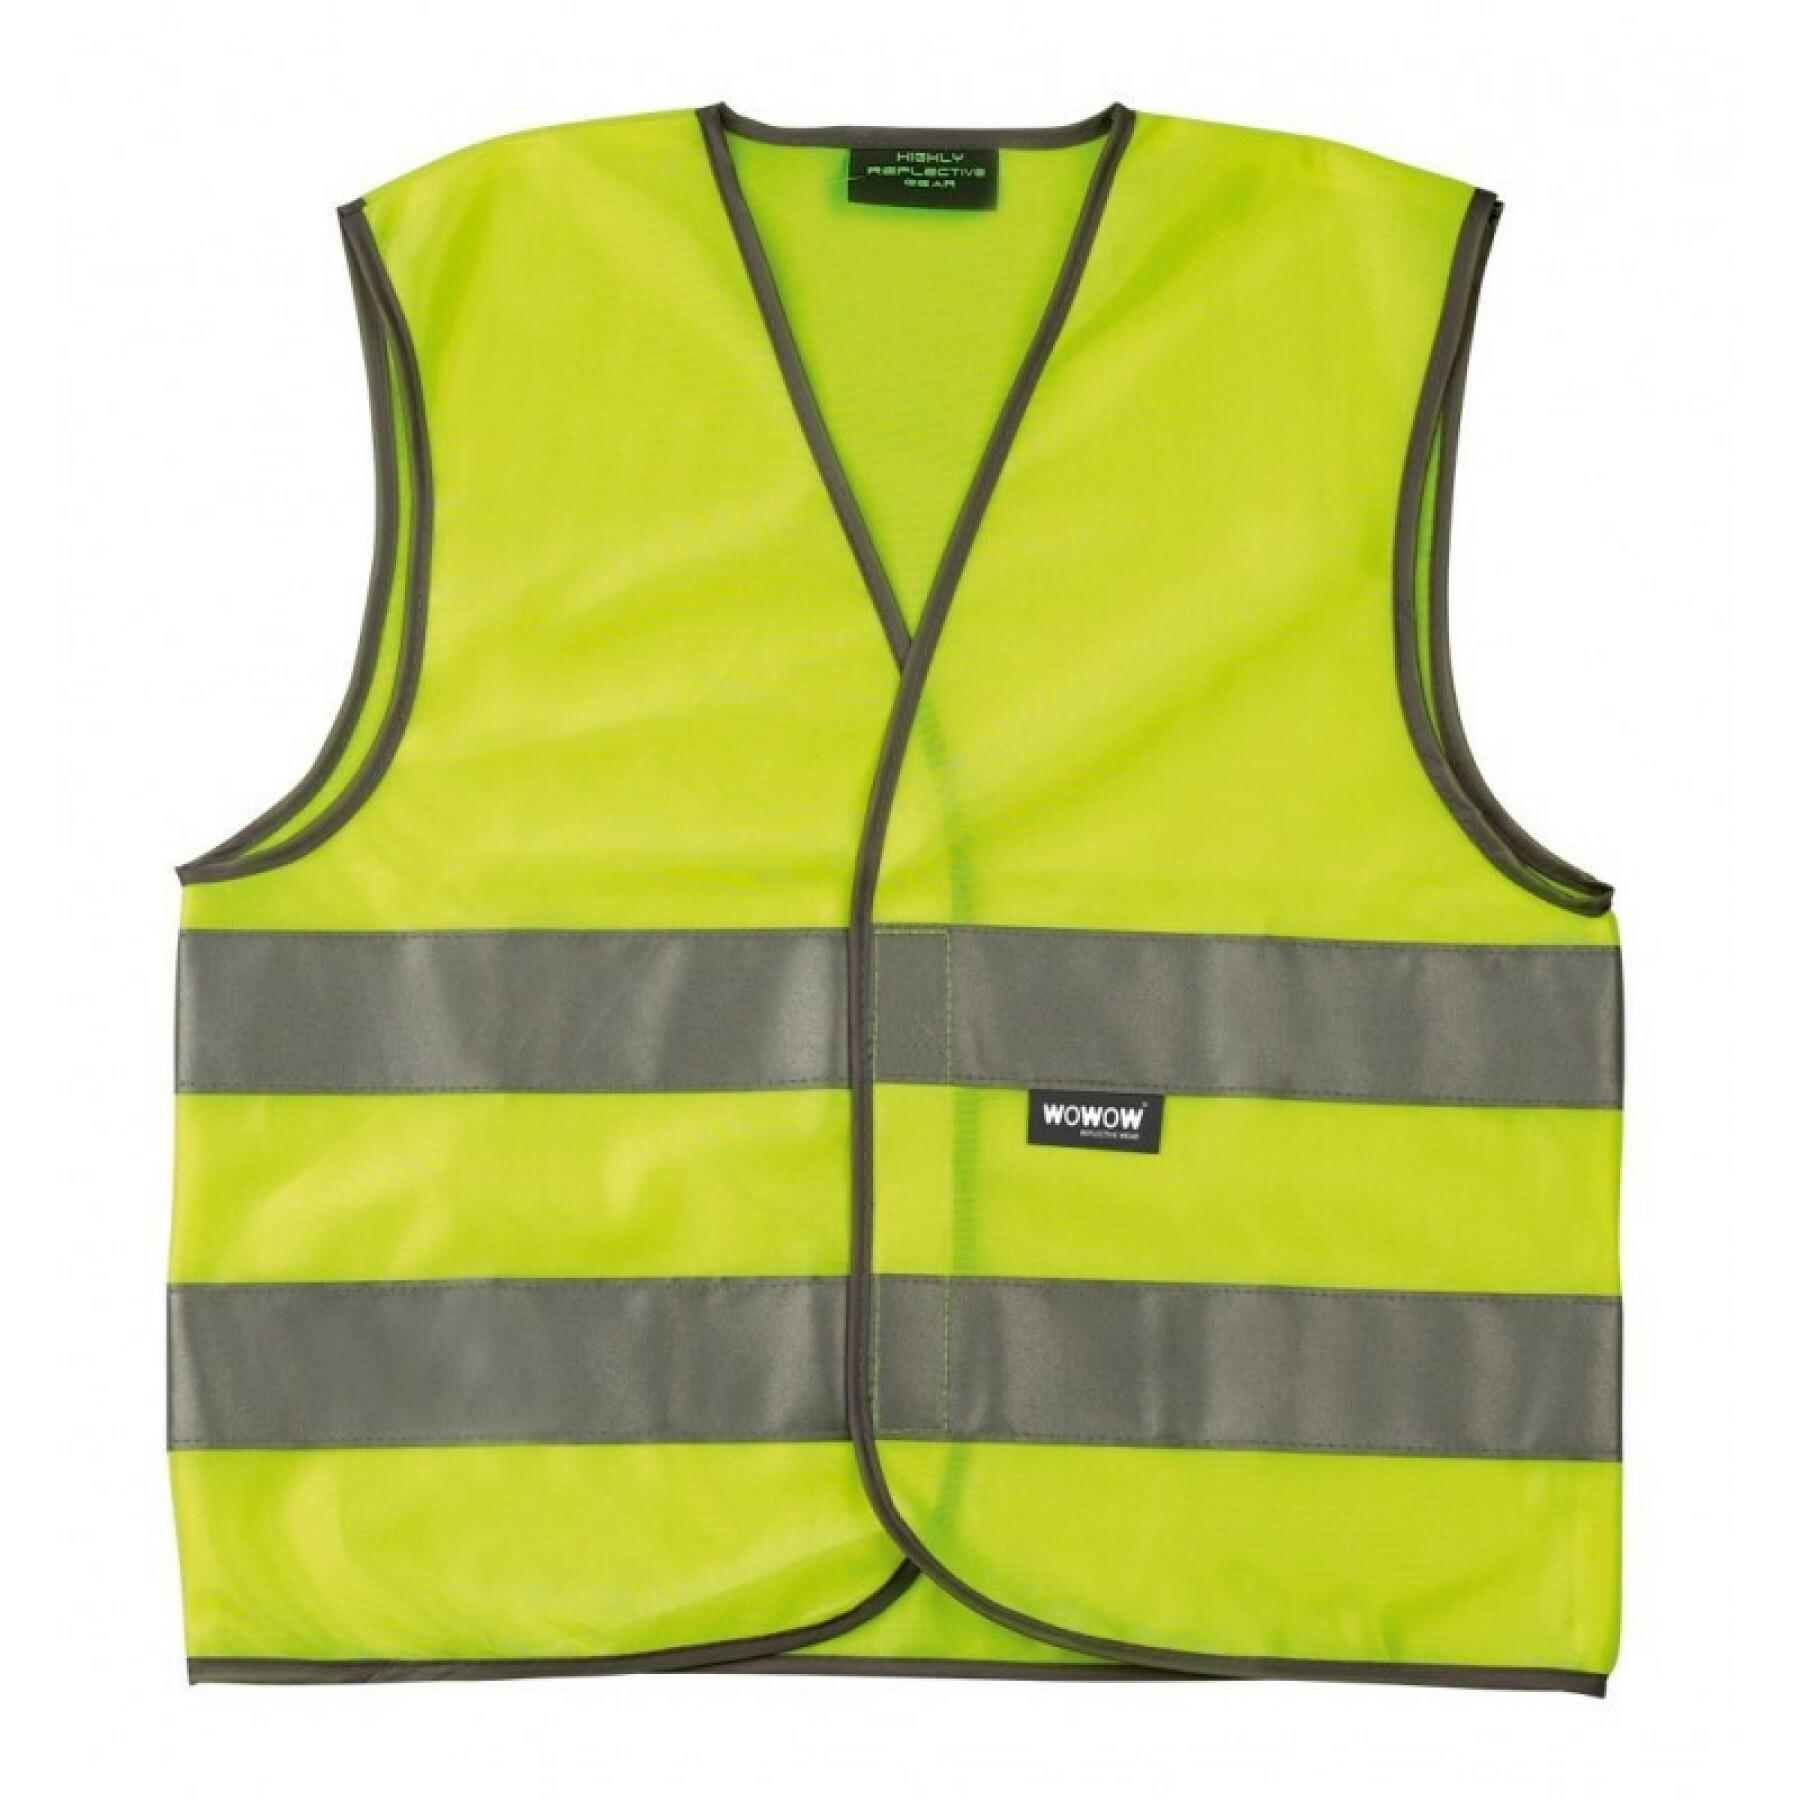 Reflective safety vest for children Wowow